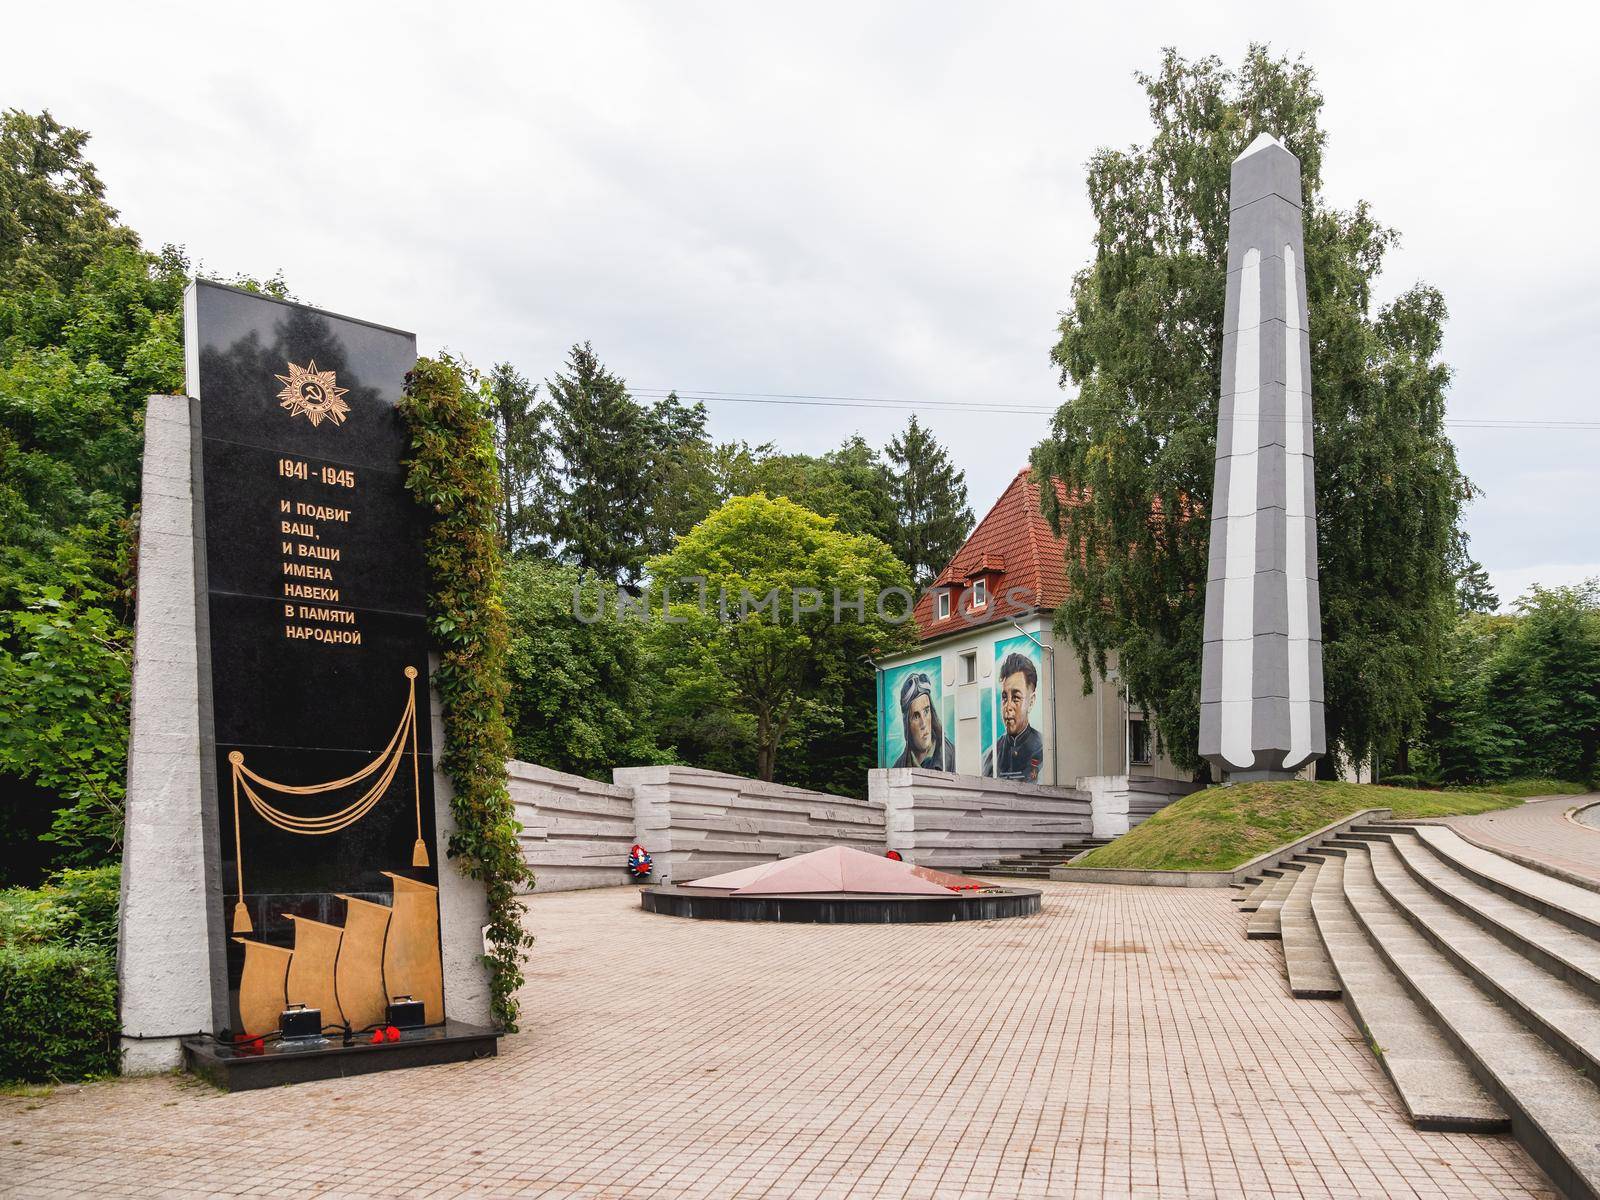 SVETLOGORSK, RUSSIA - July 21, 2019. Second World War memorial to war heroes. Monument and graffiti on house wall. by aksenovko